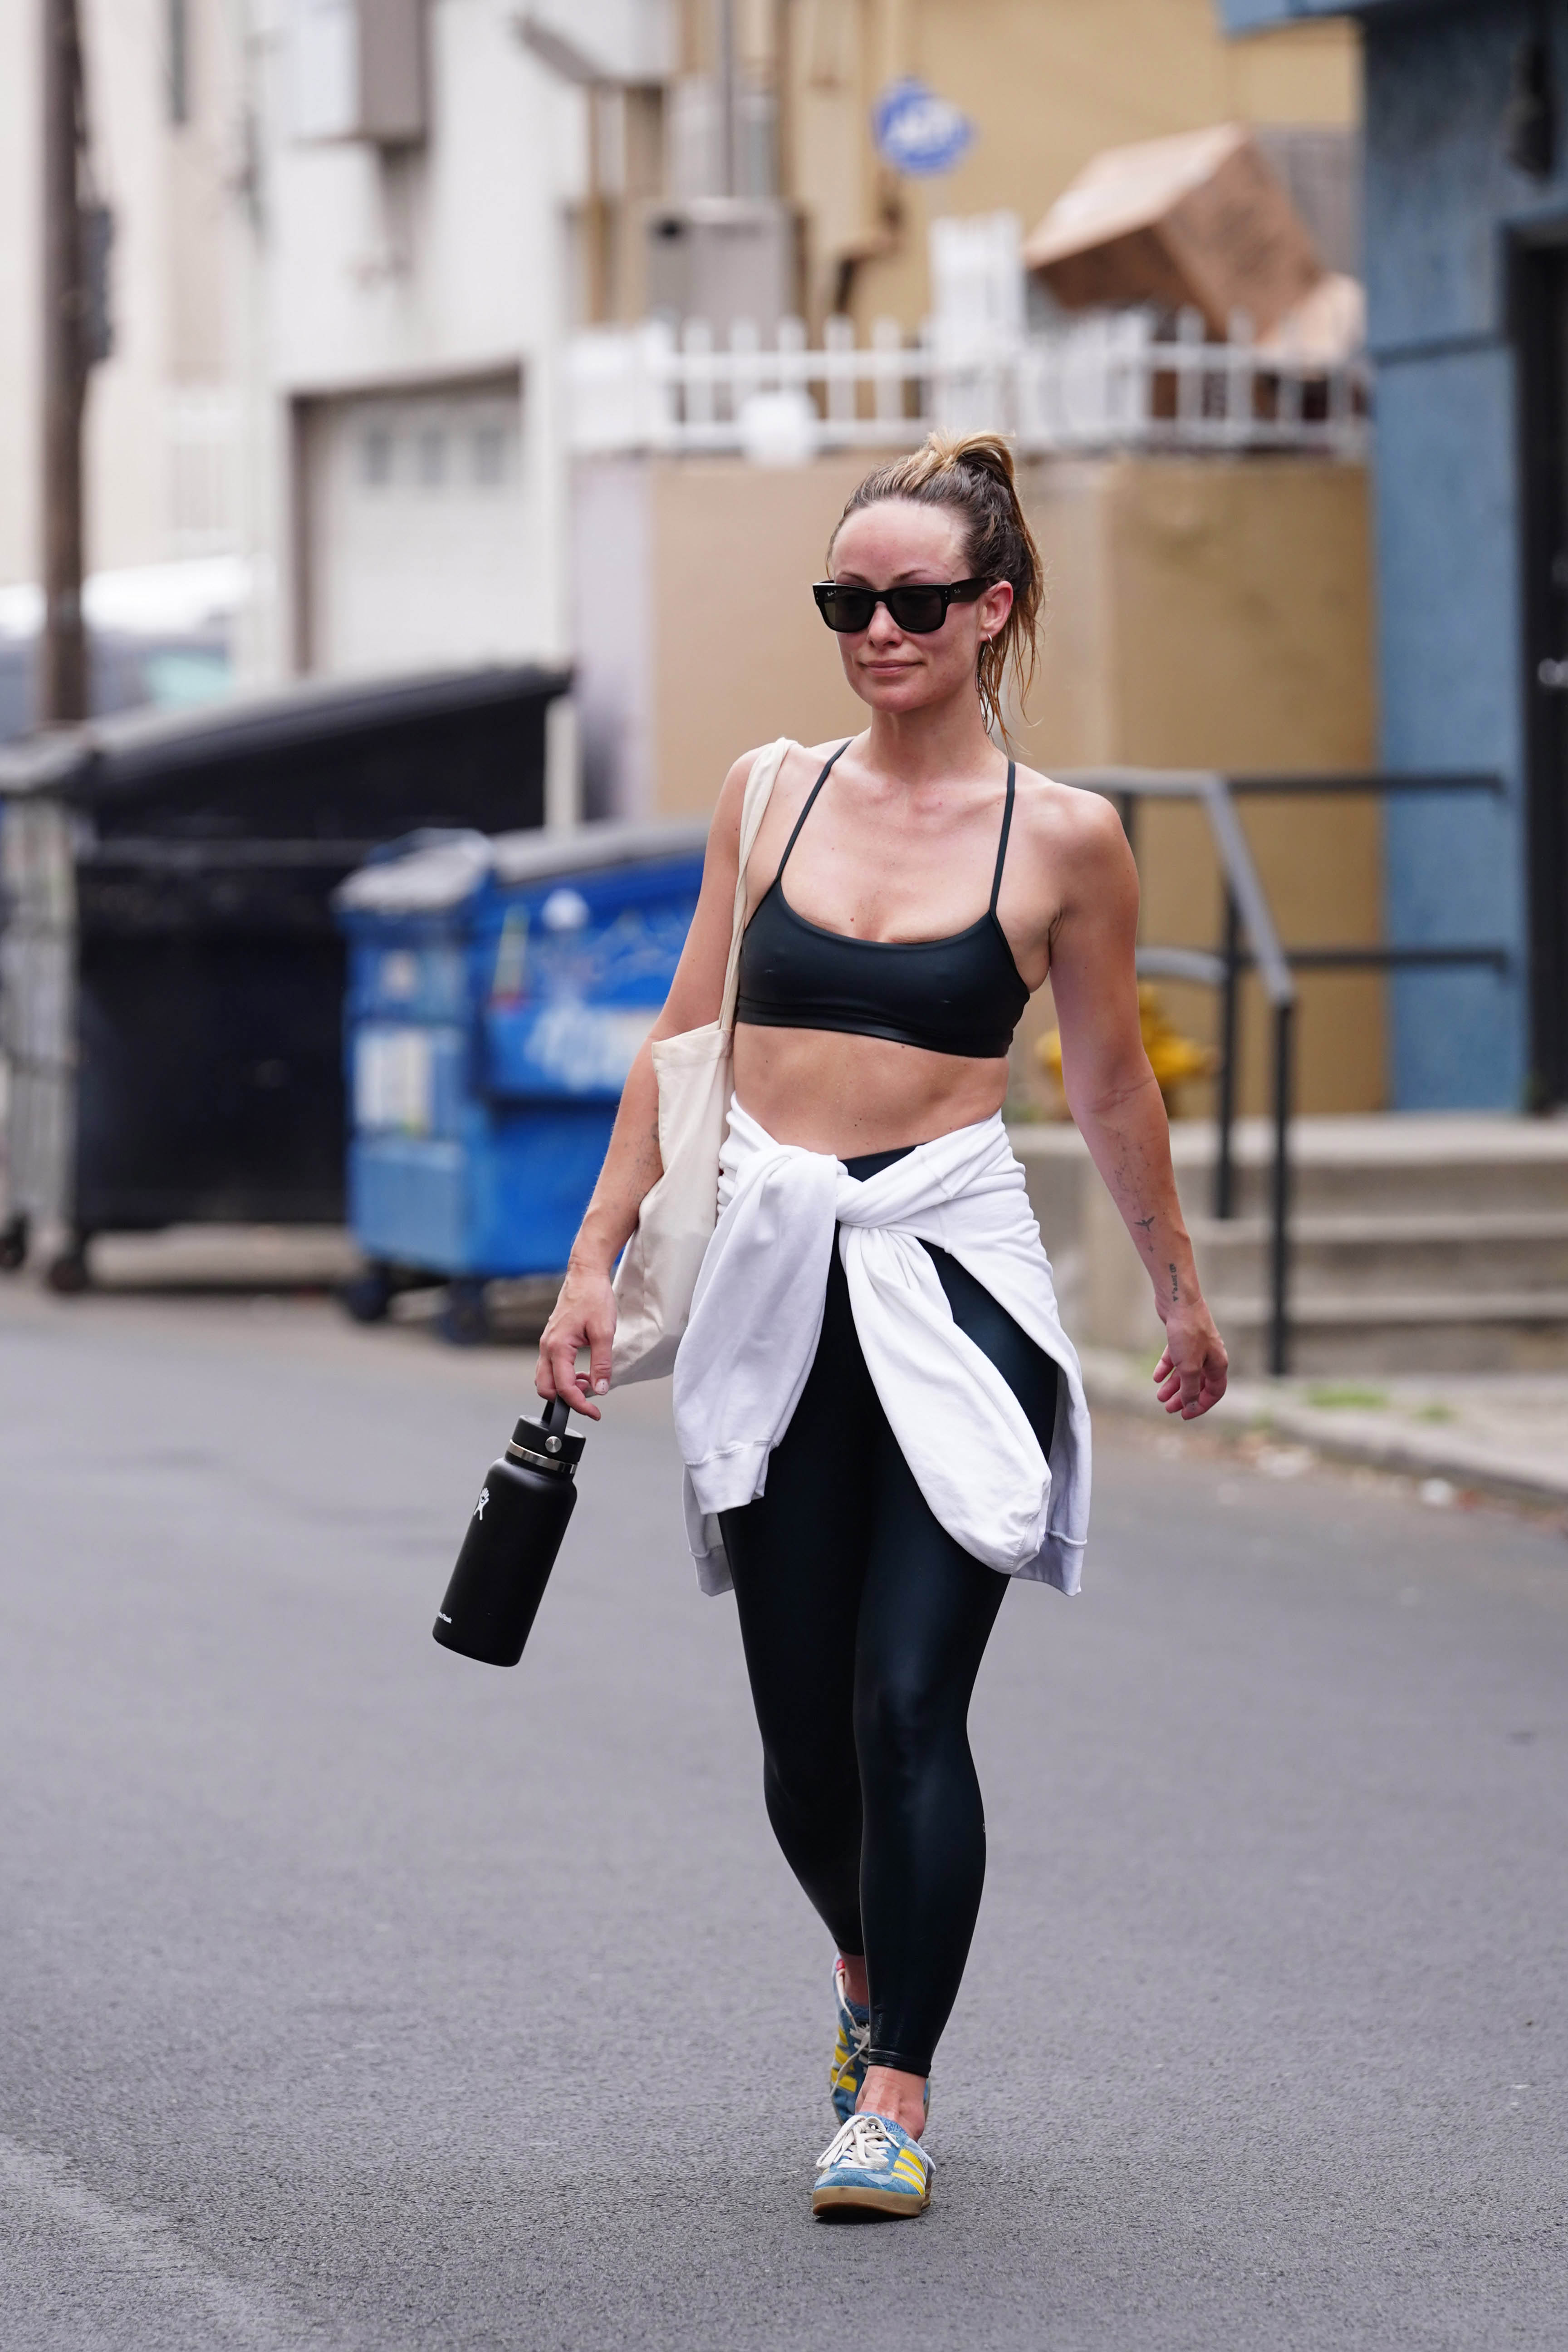 Harry Styles and Olivia Wilde Spotted At Same Gym, Same Day